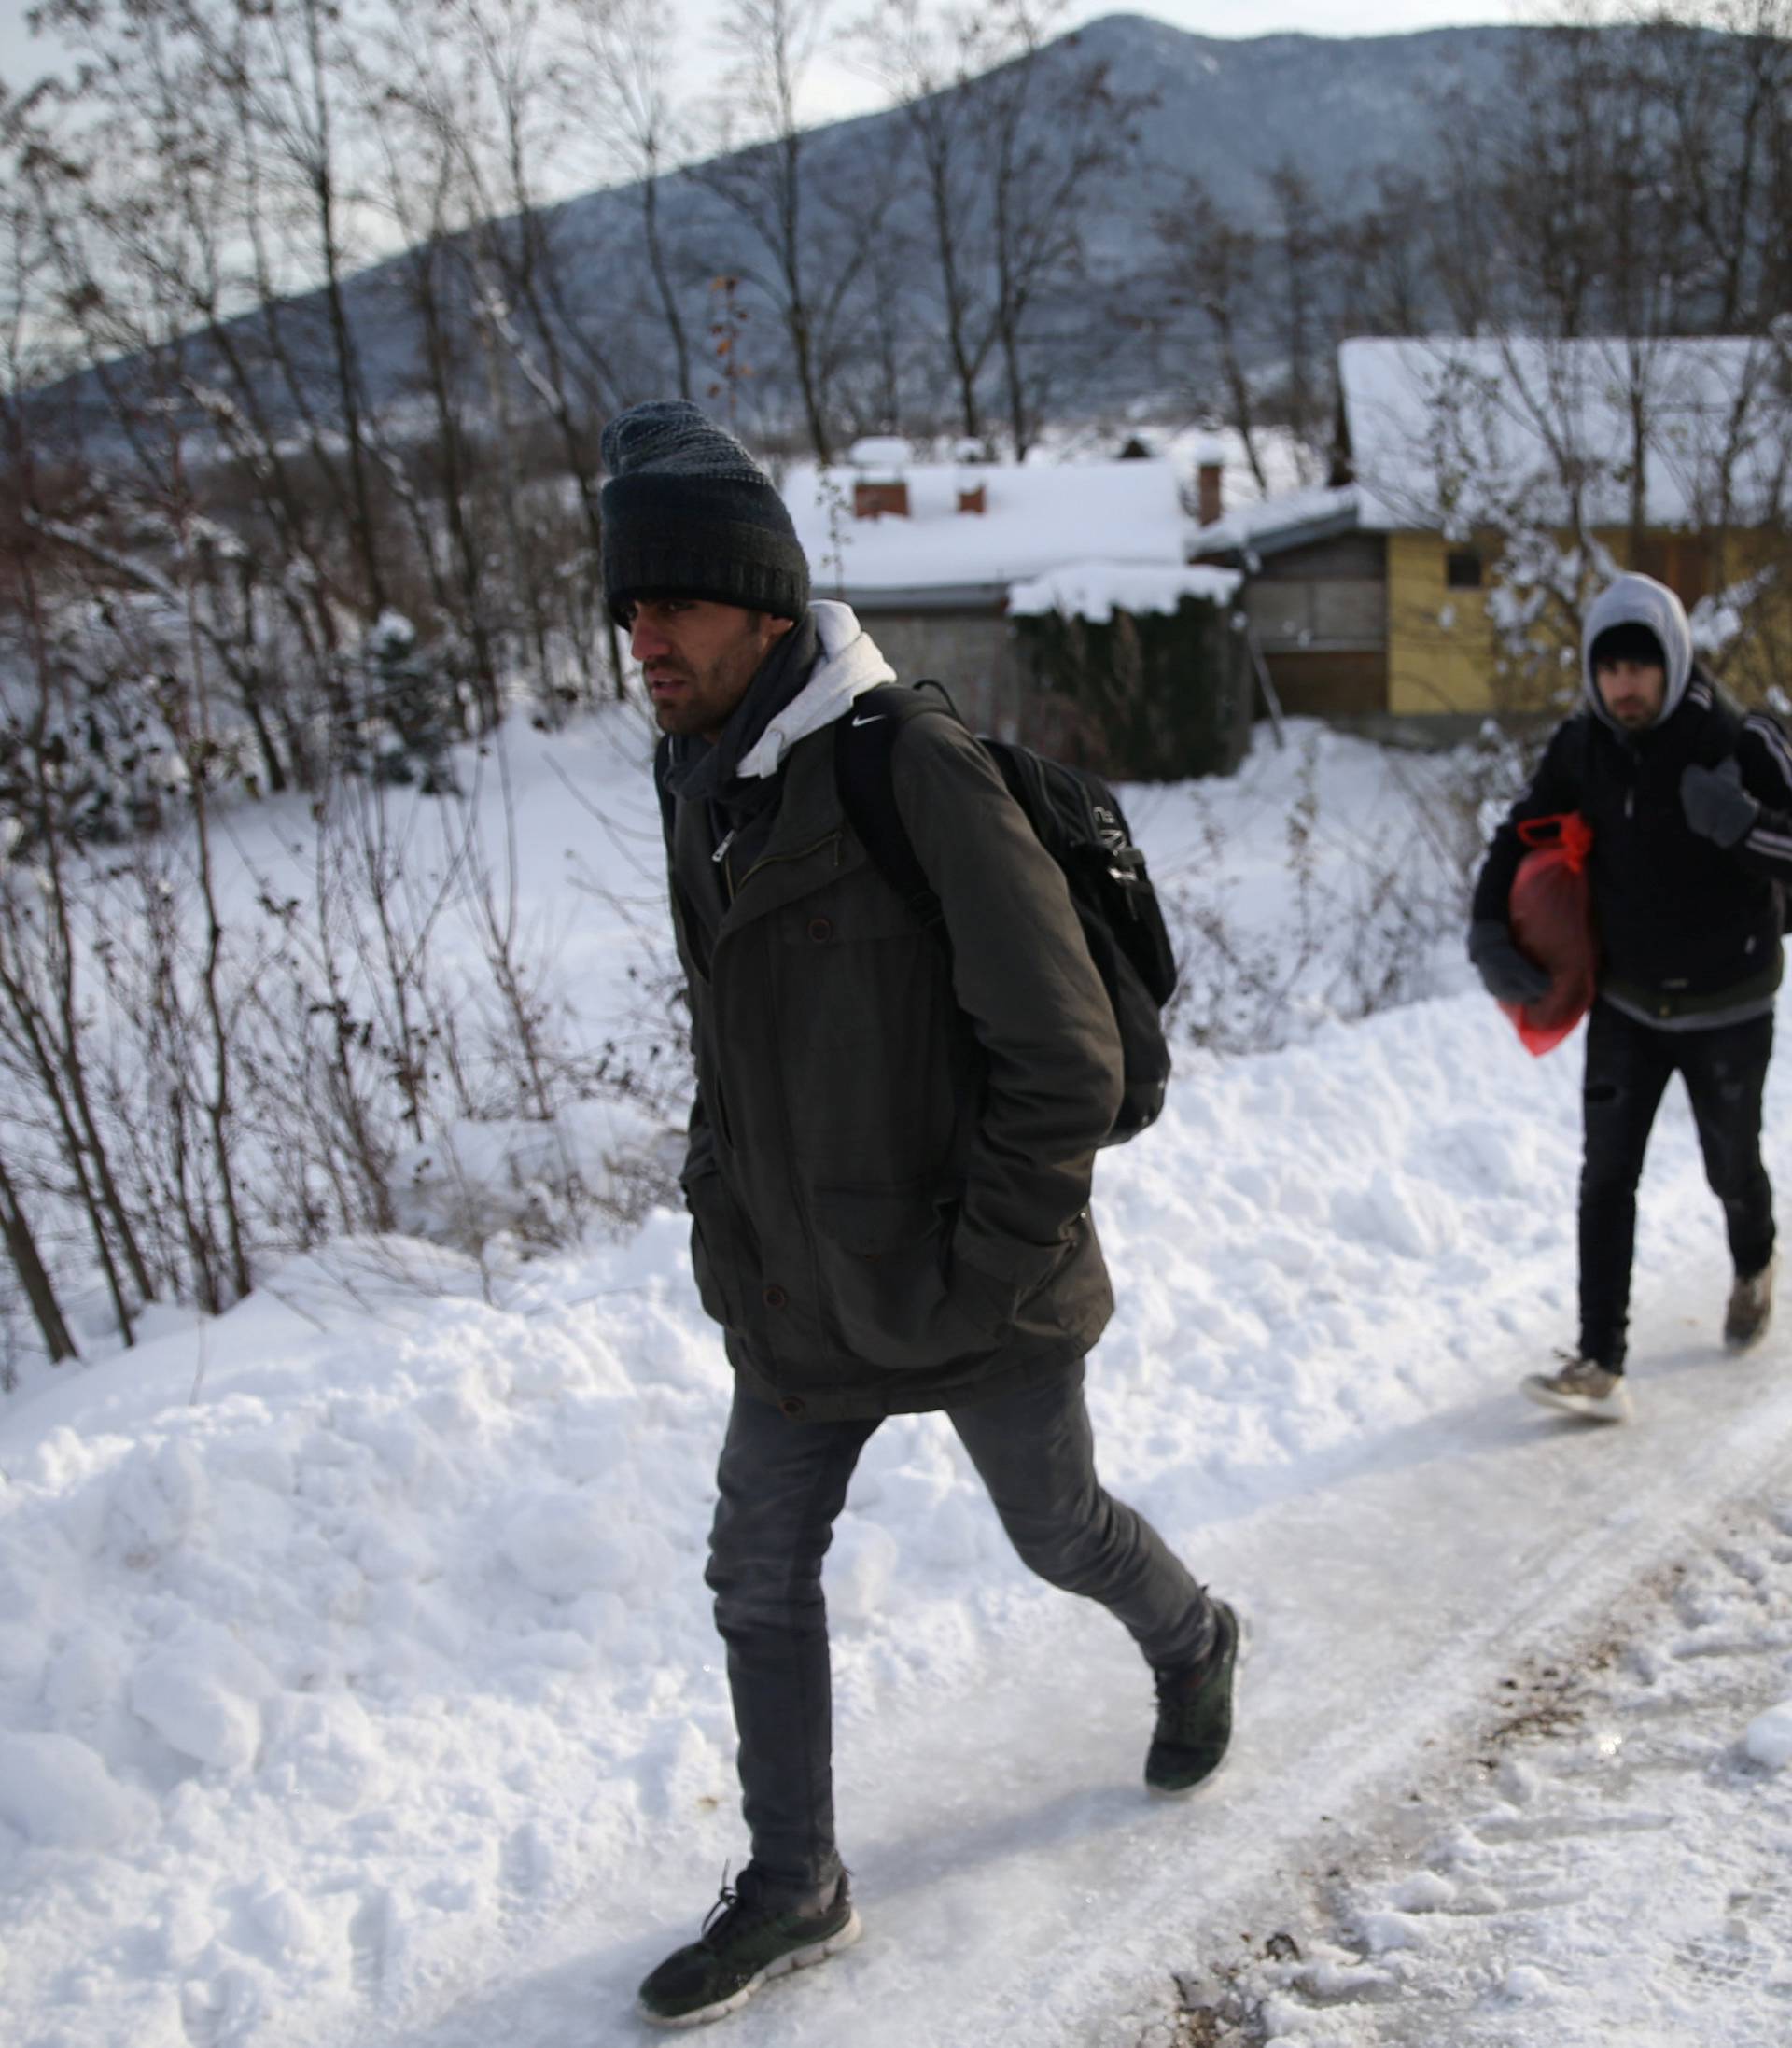 A group of migrants attempts to illegally cross the border into Croatia on the Pljesevica Mountain near Bihac